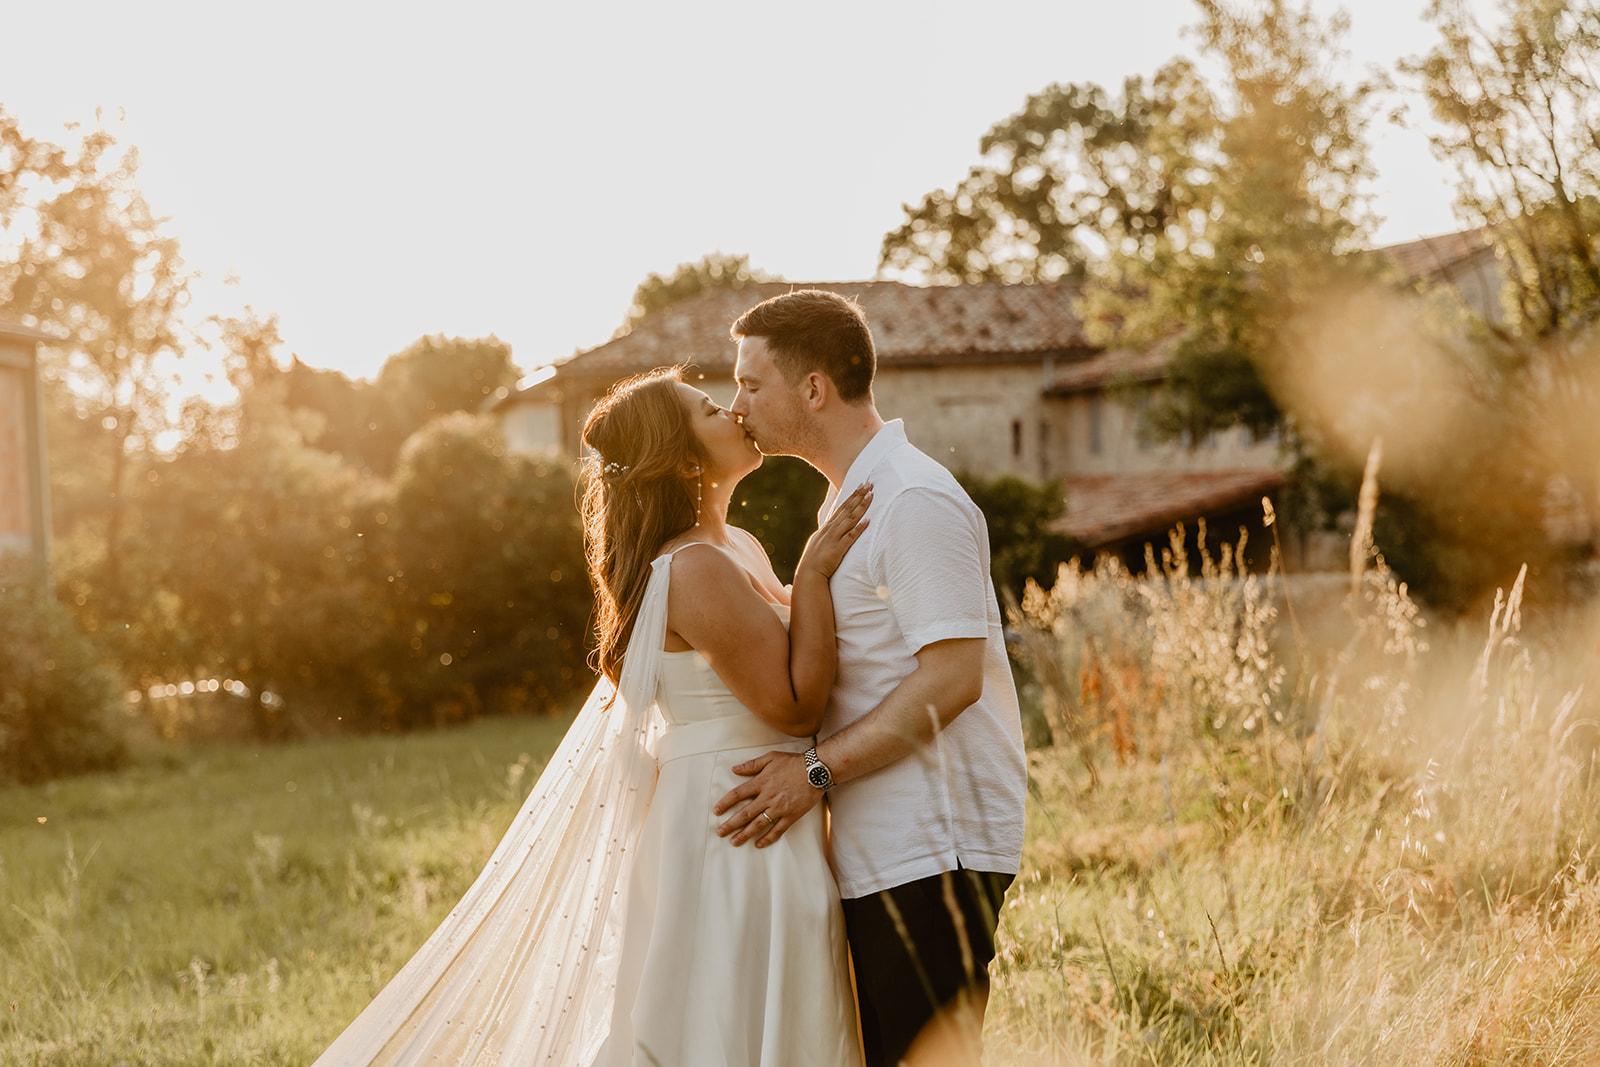 Bride and groom at golden hour at a France Destination Wedding. Photography and Videography by Olive Joy Photography